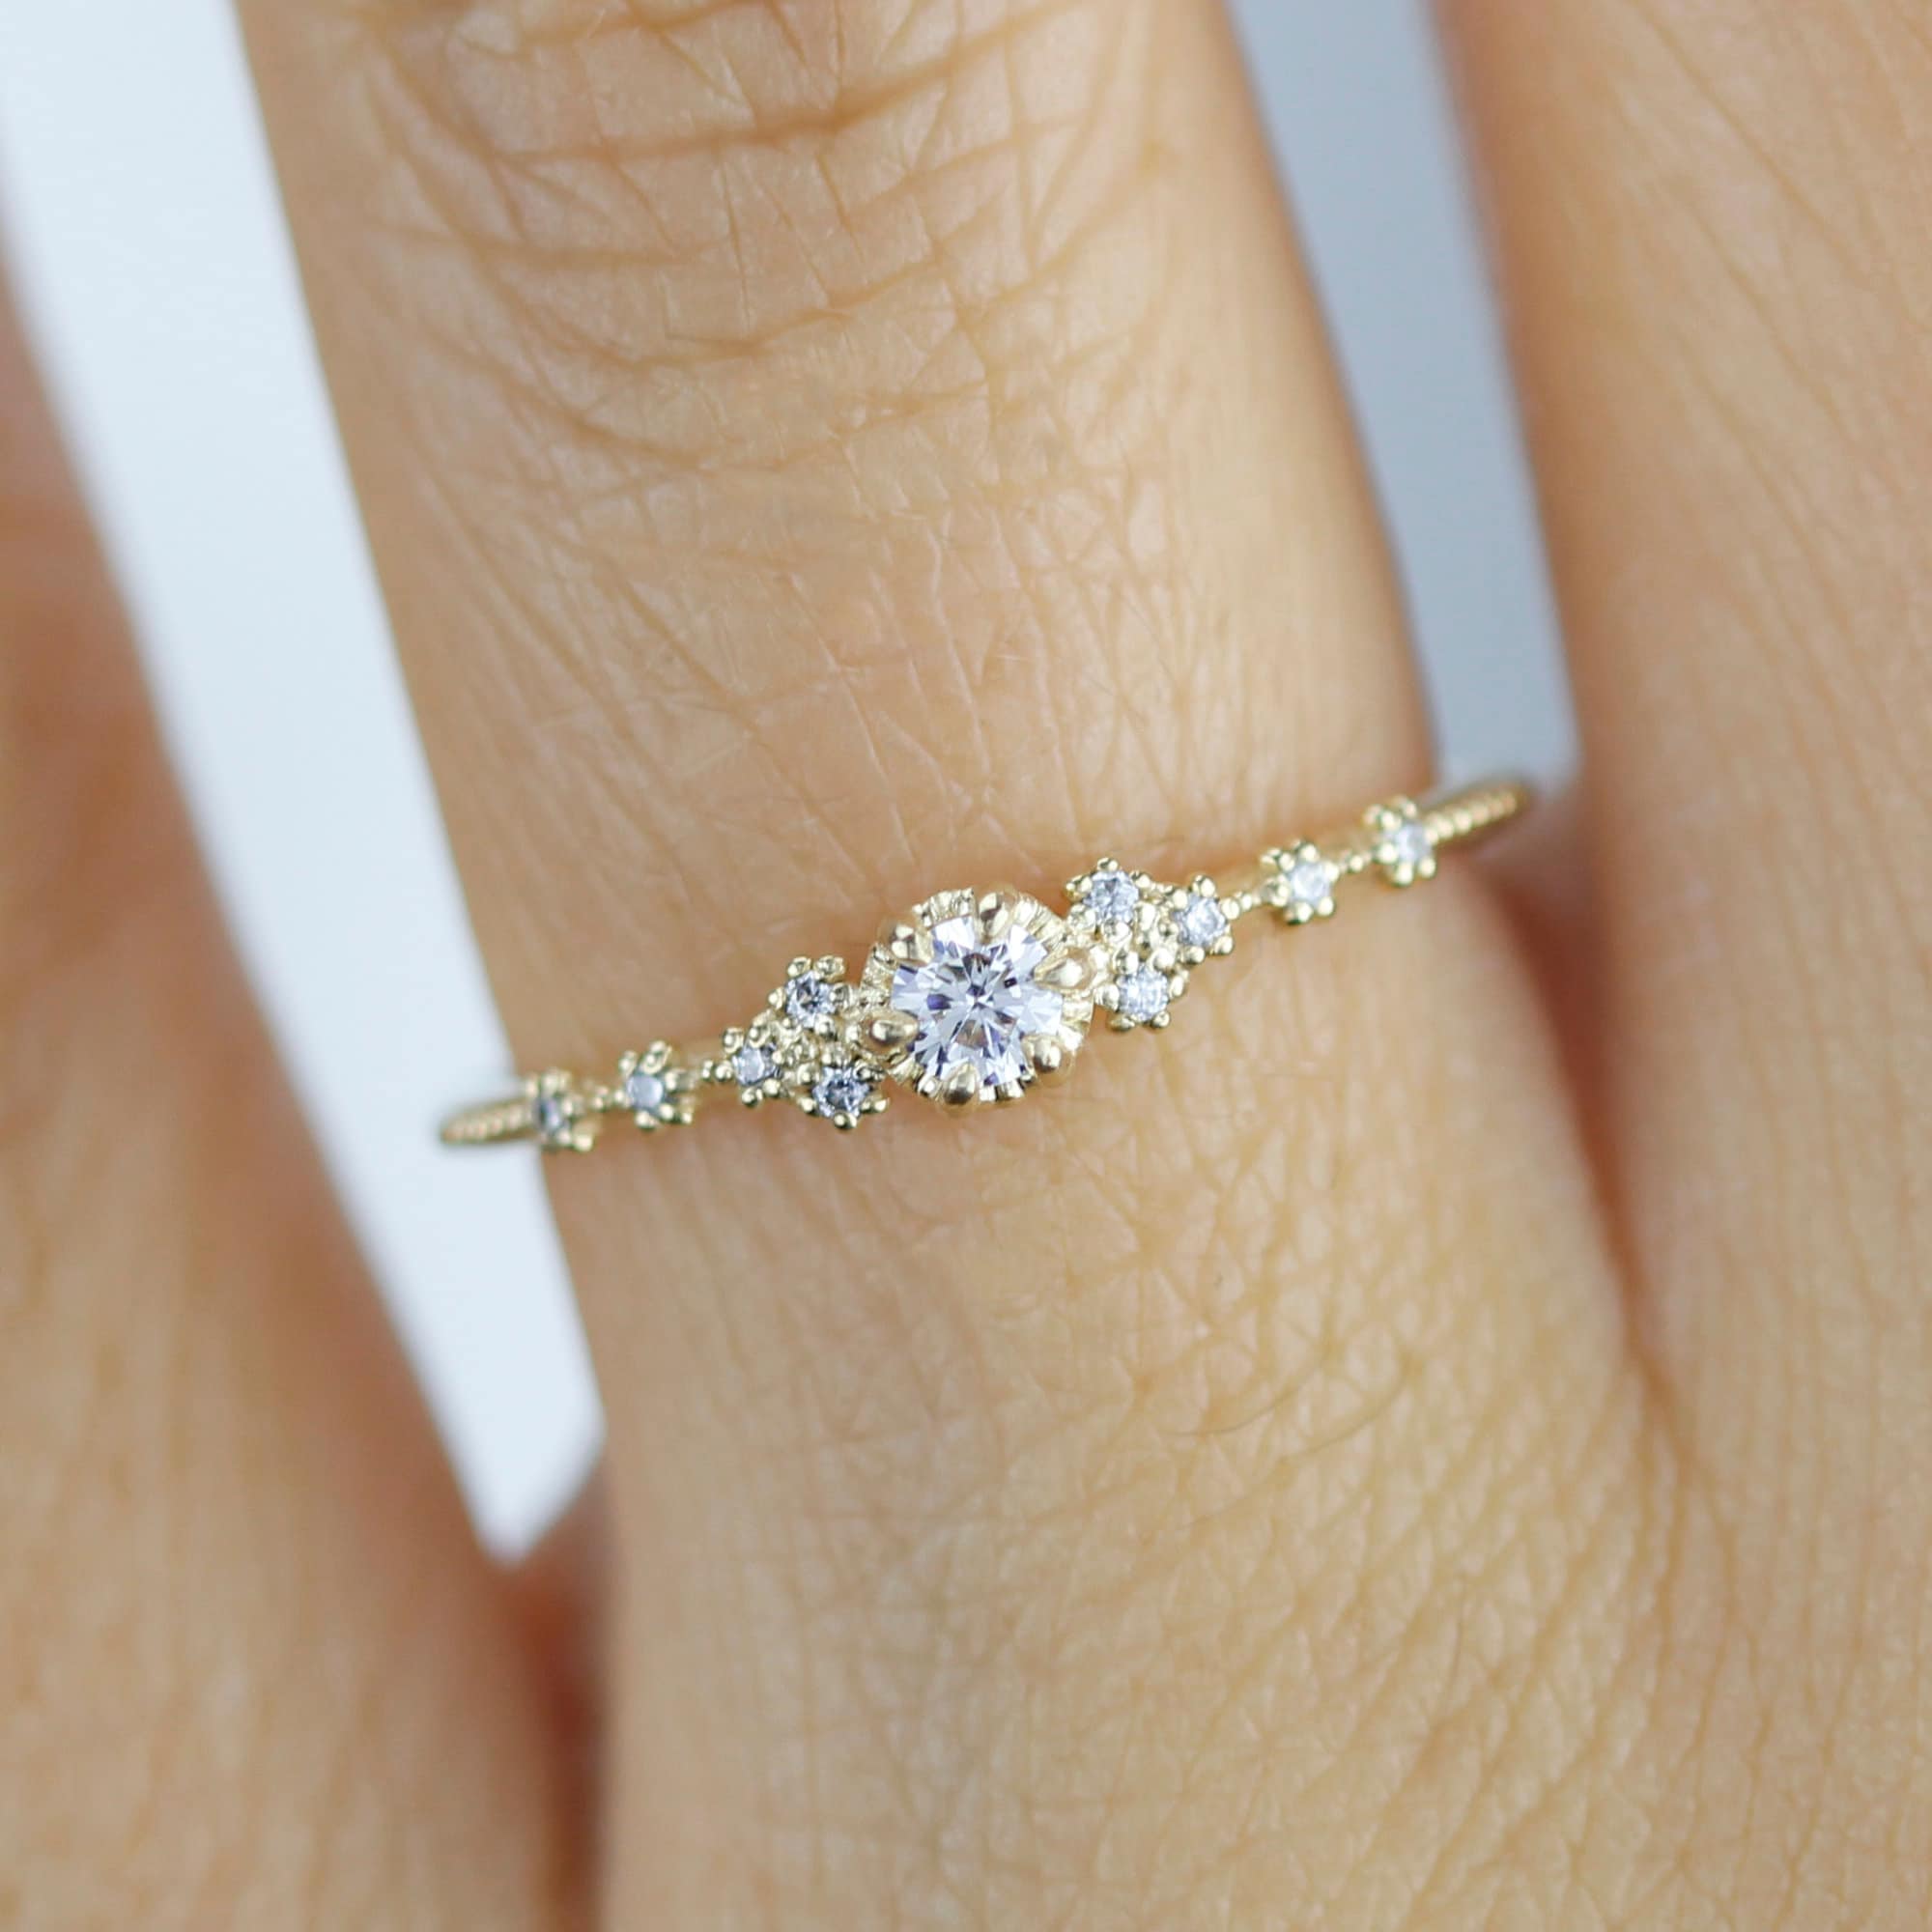 Simple Engagement Ring, Delicate Engagement Ring, Engagement Ring